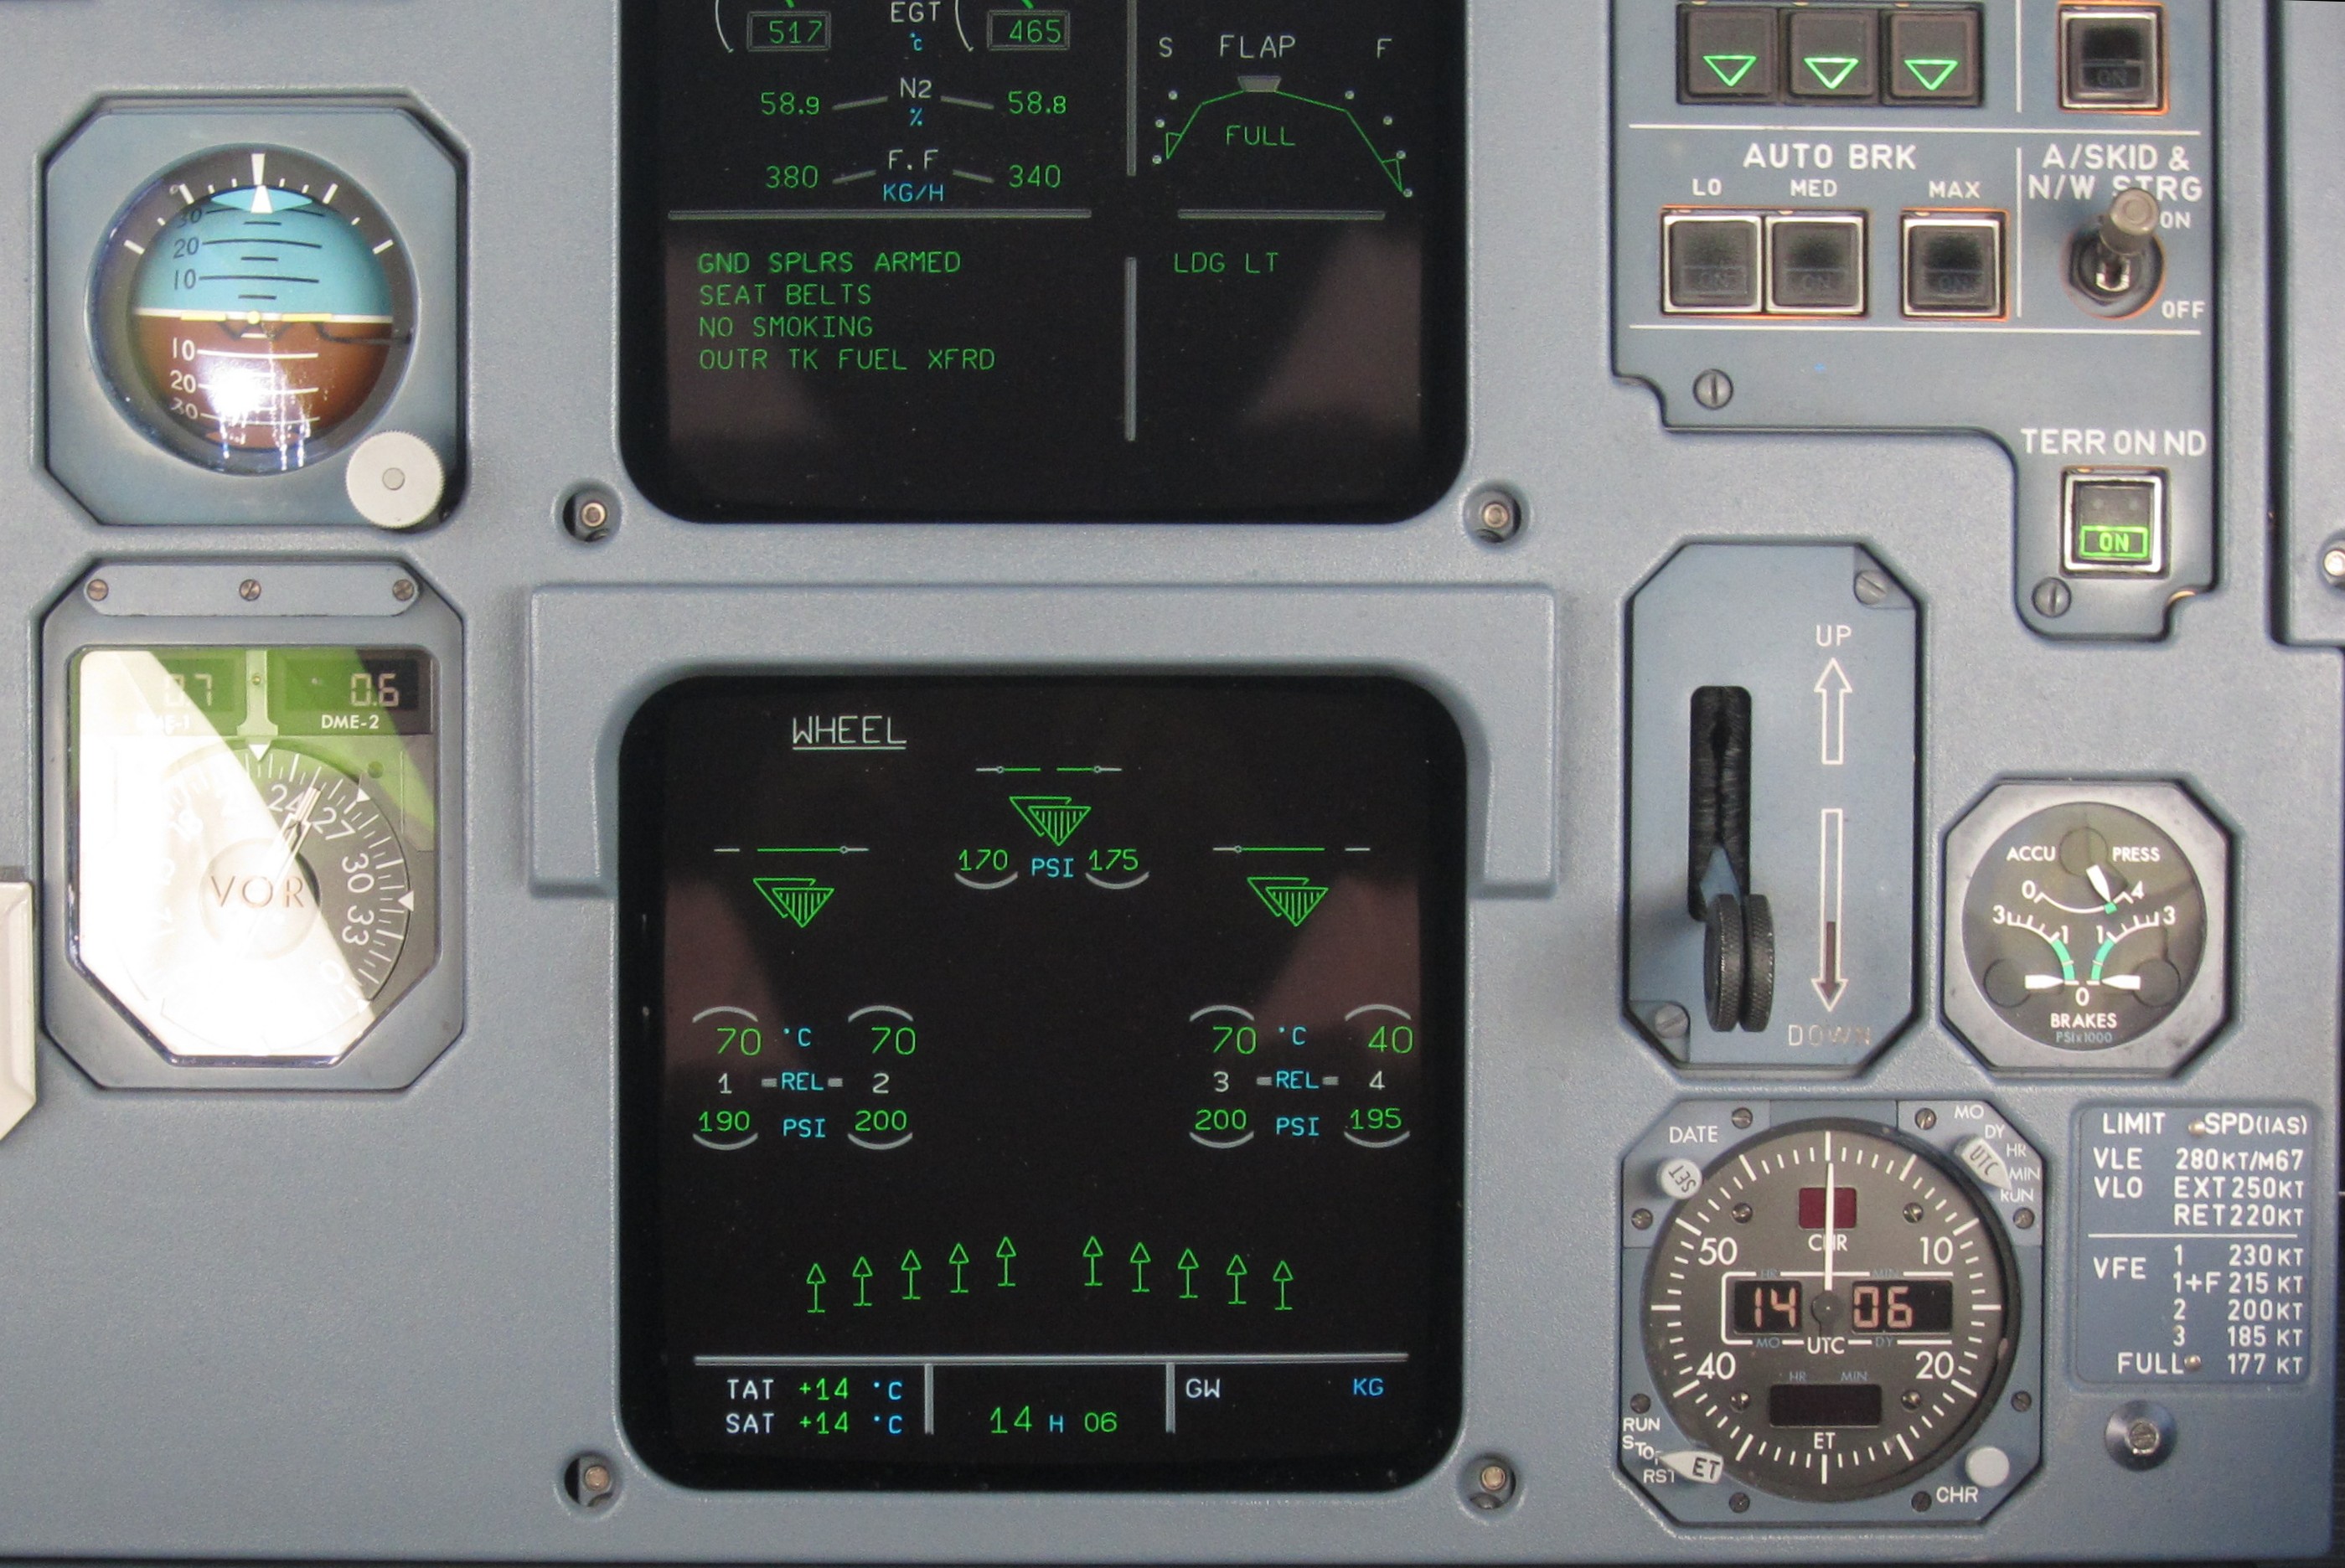 Center panel display indicating spoilers deployment in A320 cockpit